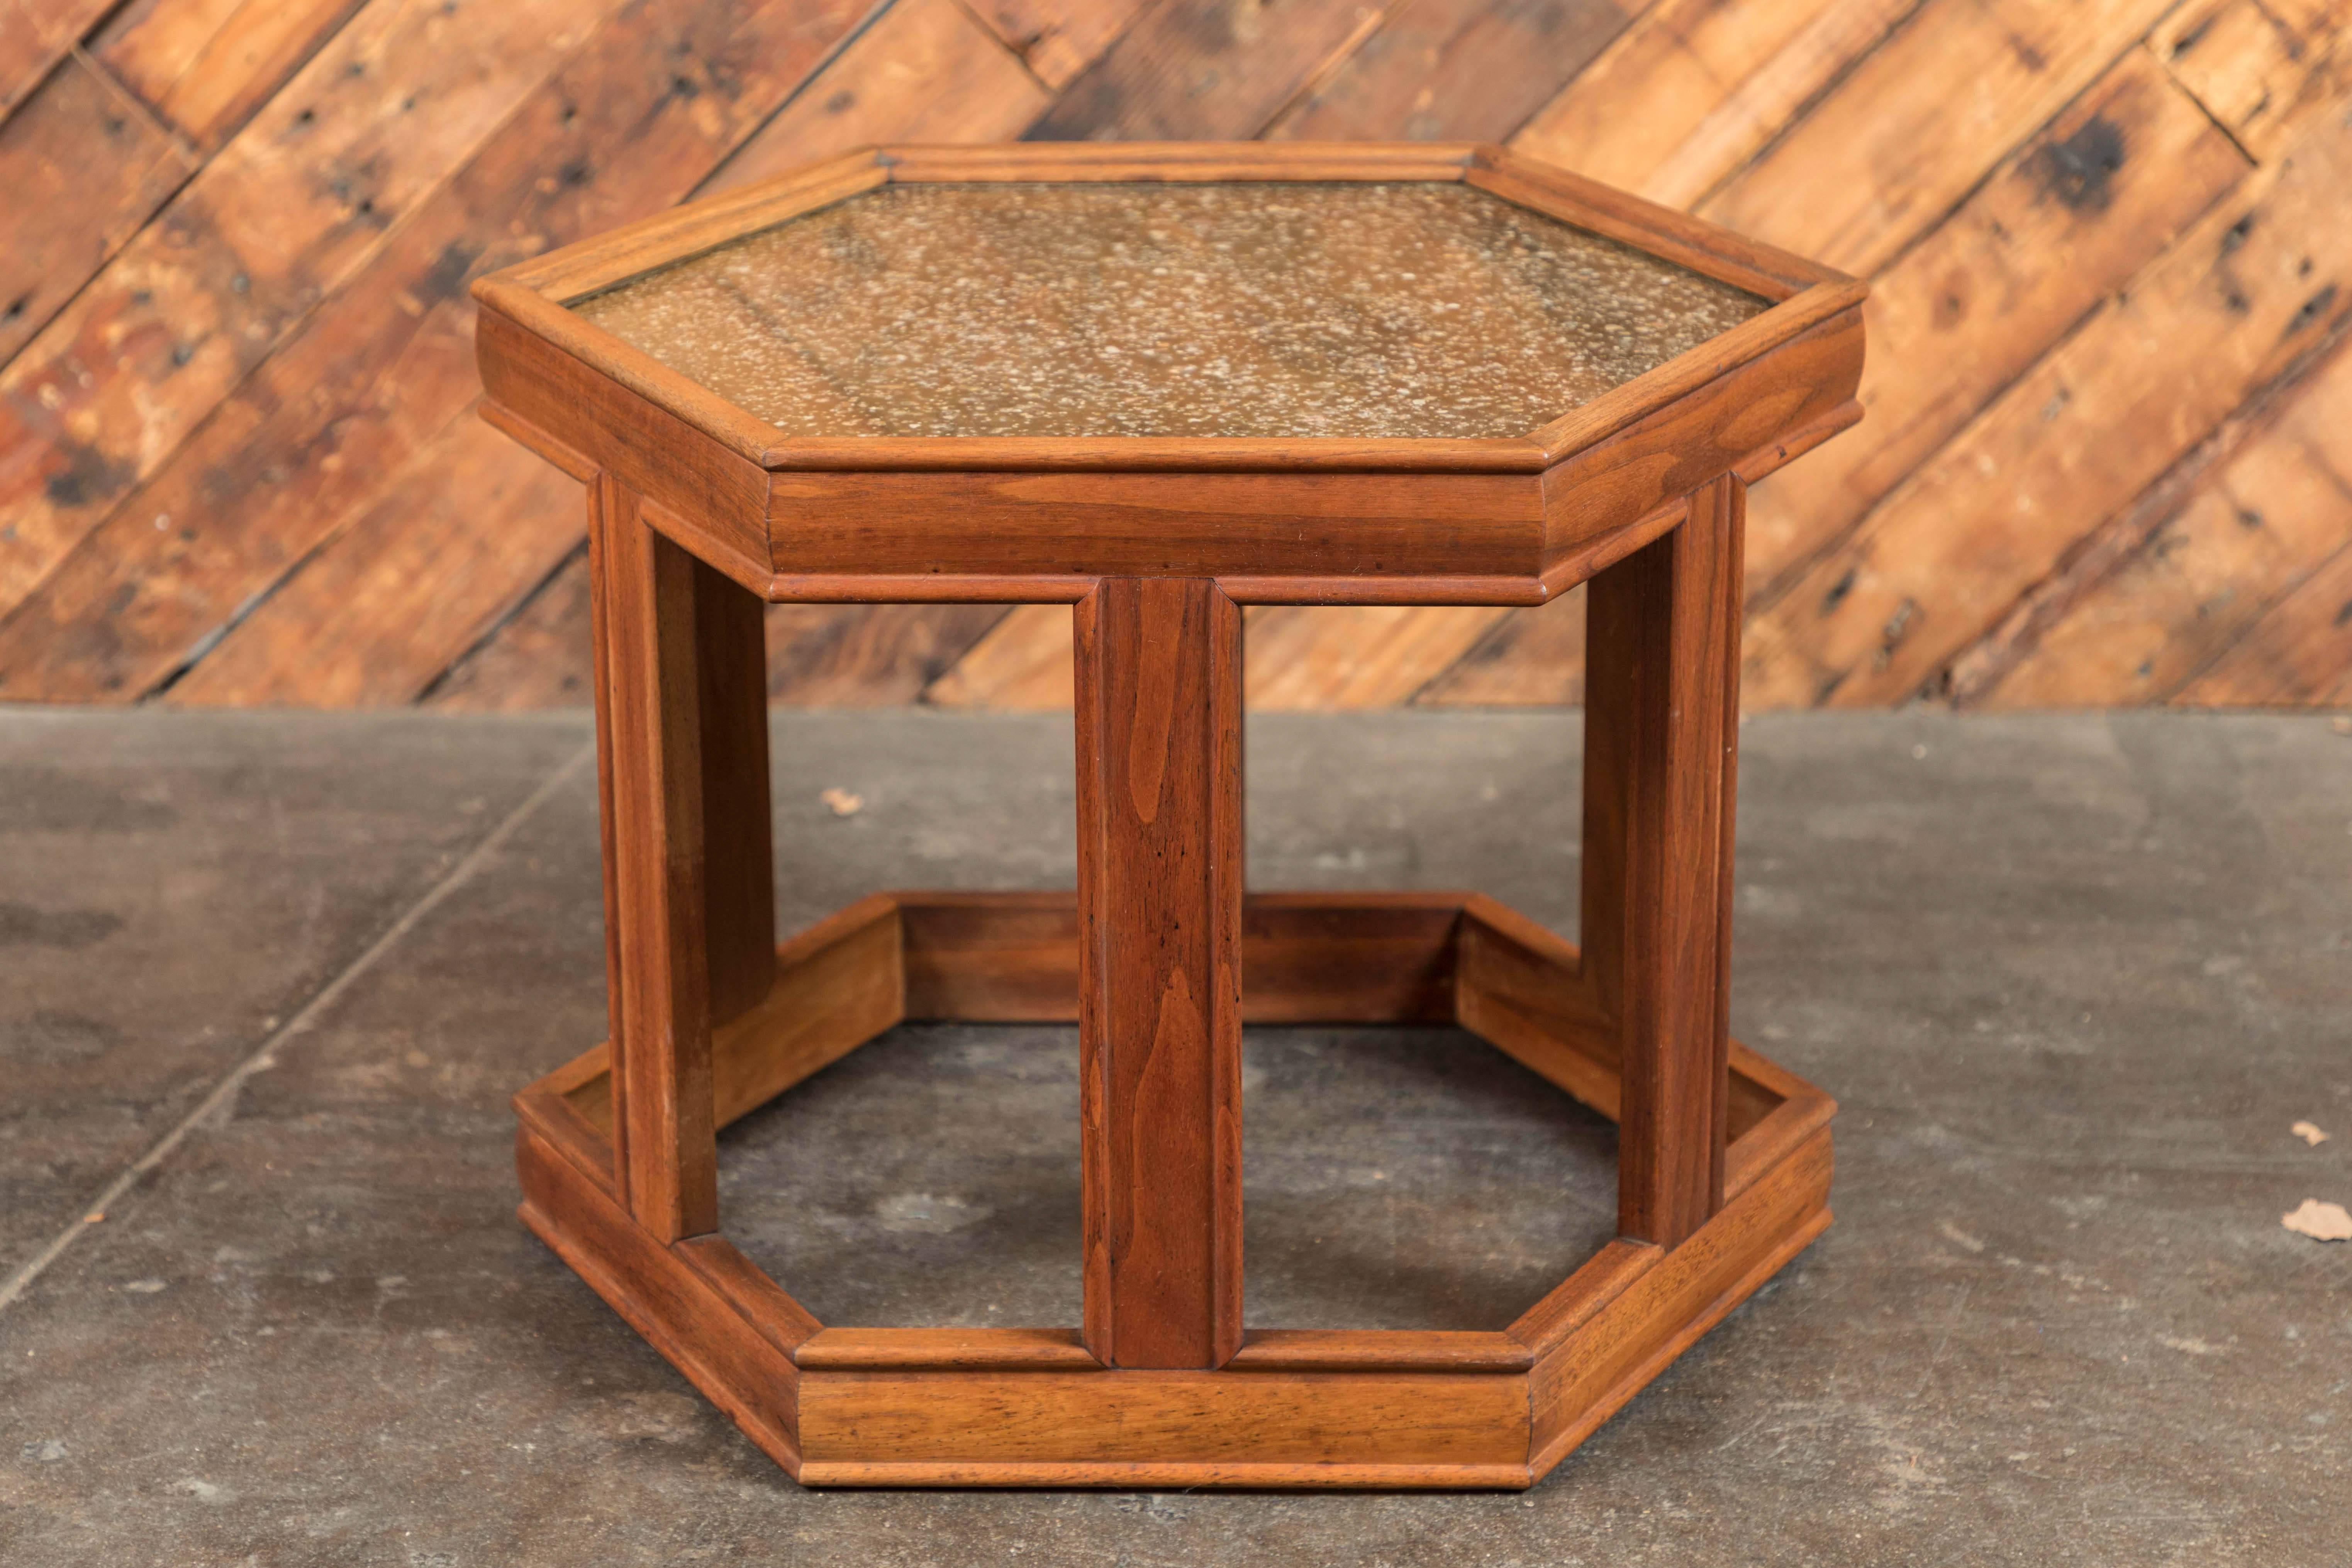 Mid century walnut and copper enamel occasional side tables by John Keal for Brown Saltman
Listing includes two regular height side tables and 1 rare shorter version which when all pushed together has a great look. Very versatile set. Excellent